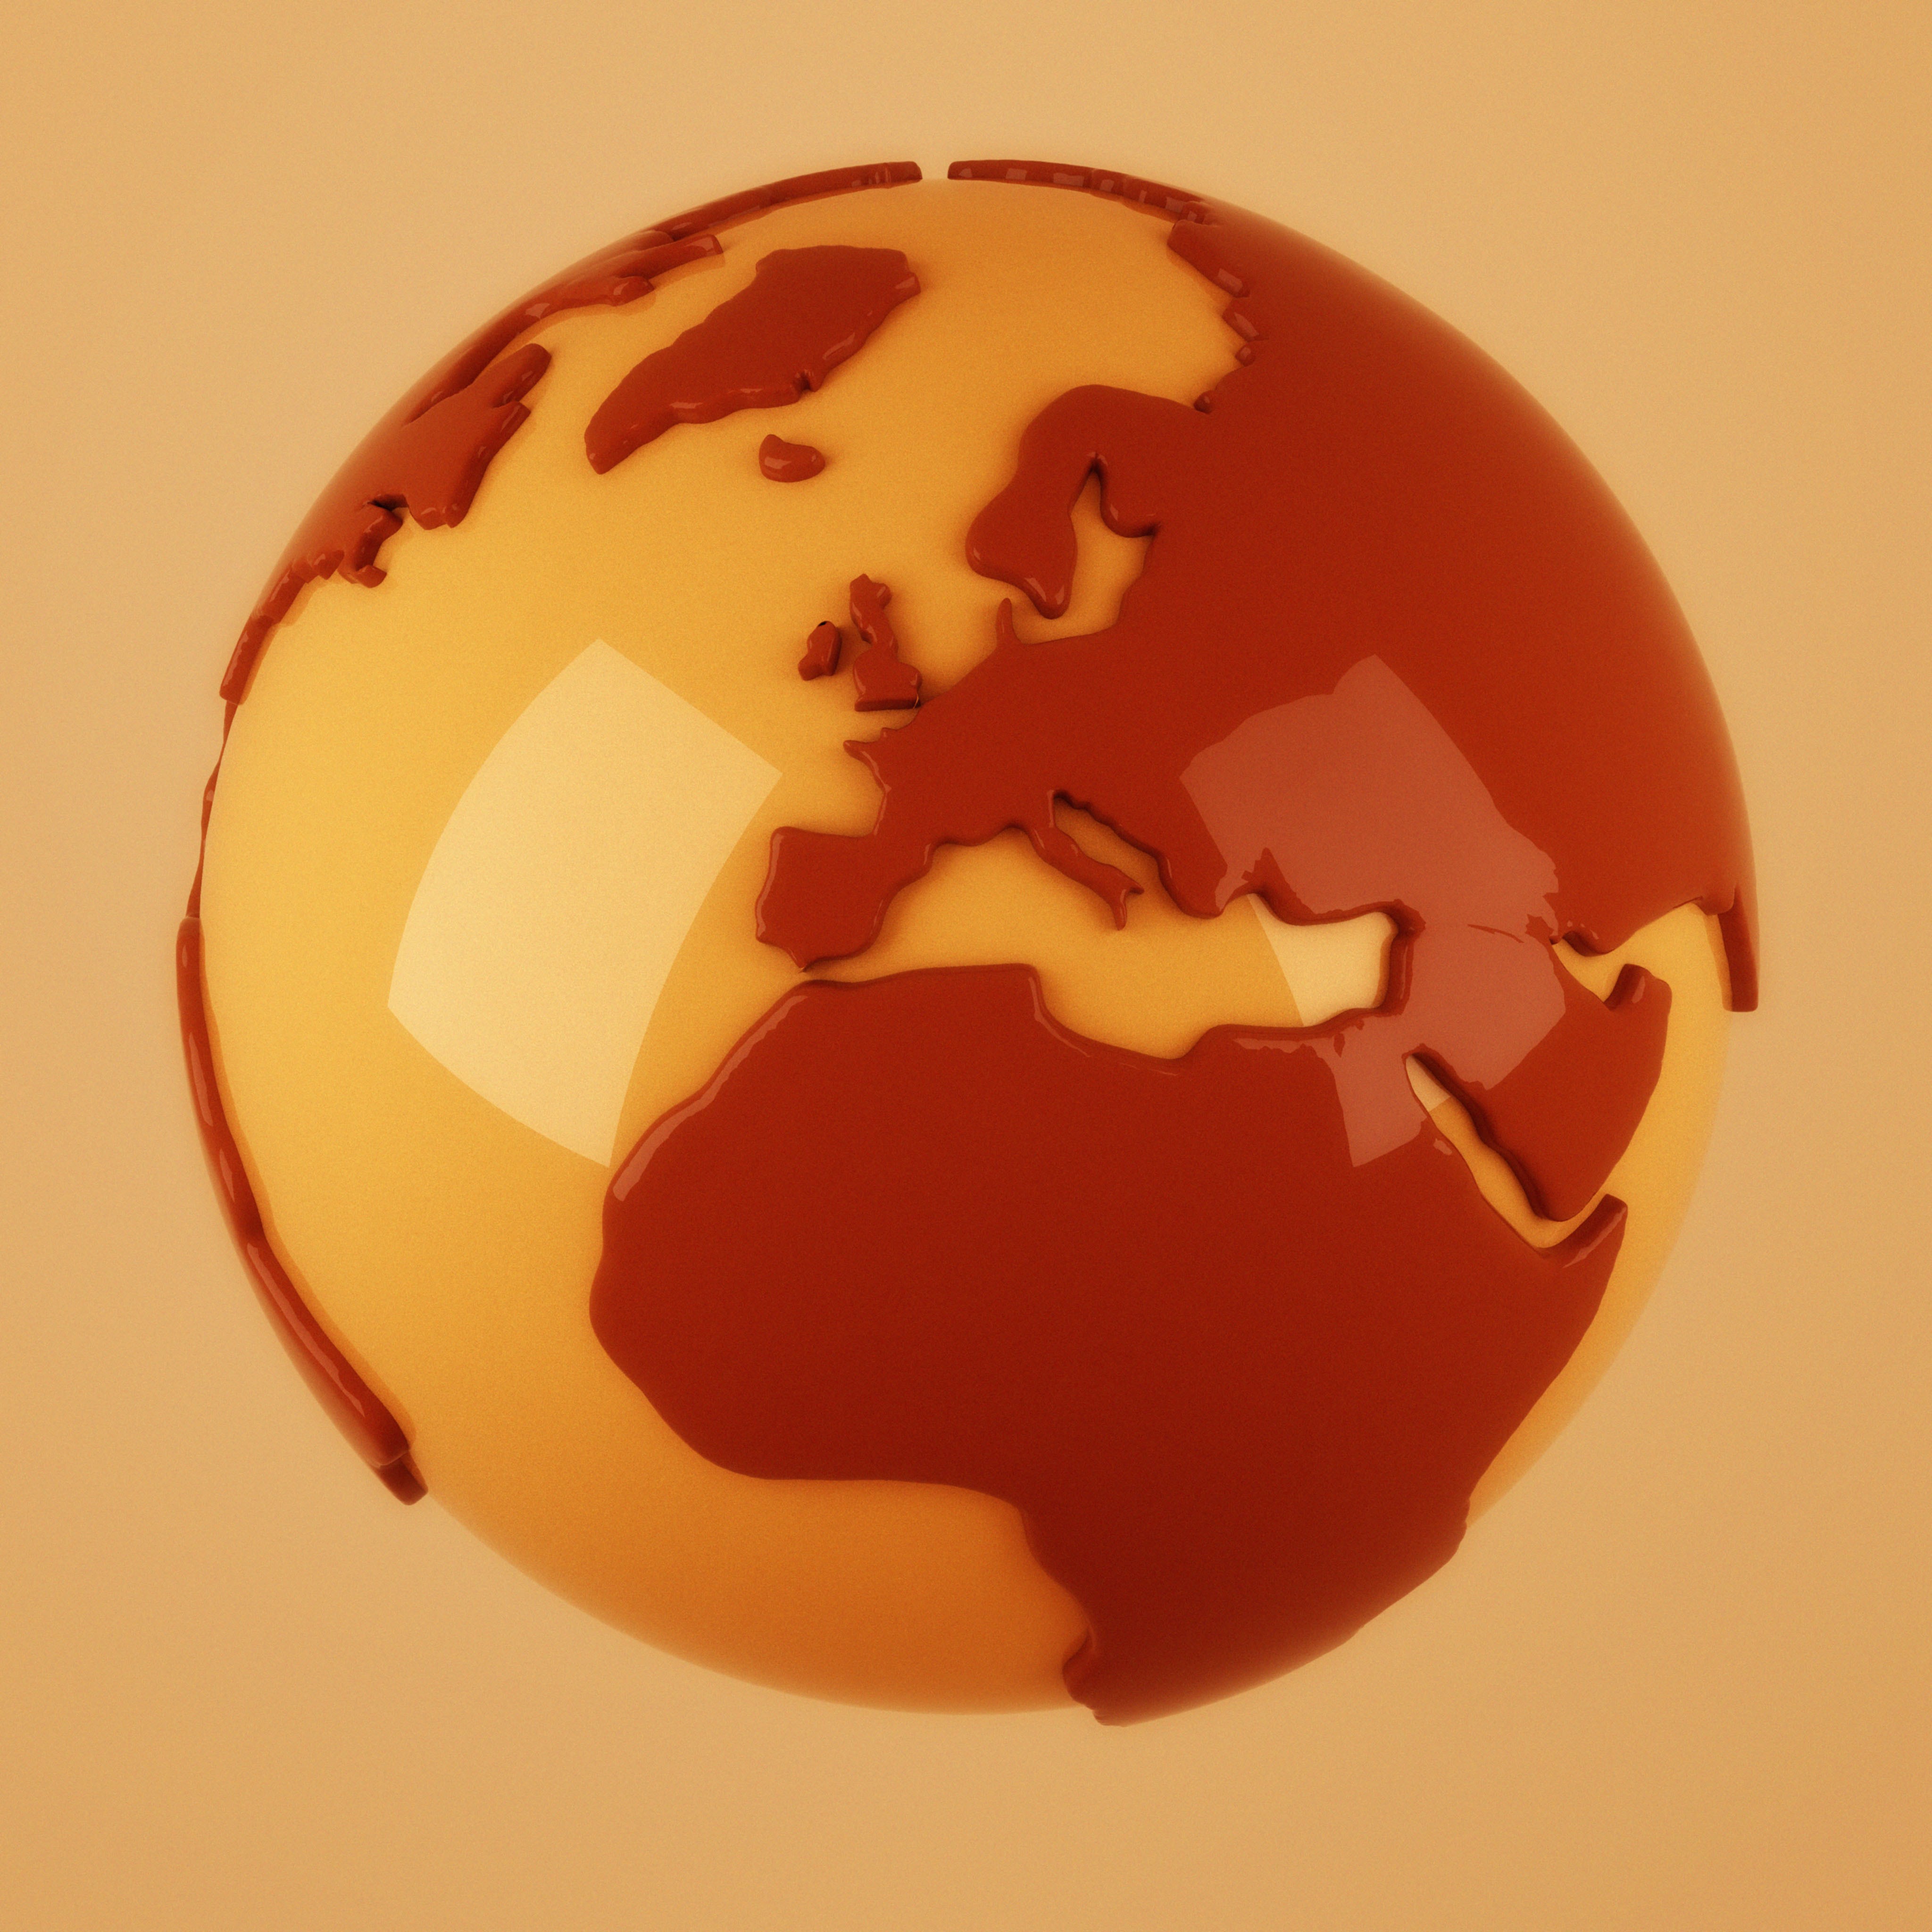 Digital Art Globes Simple Background World Europe Africa Asia Continents Sea 4096x4096